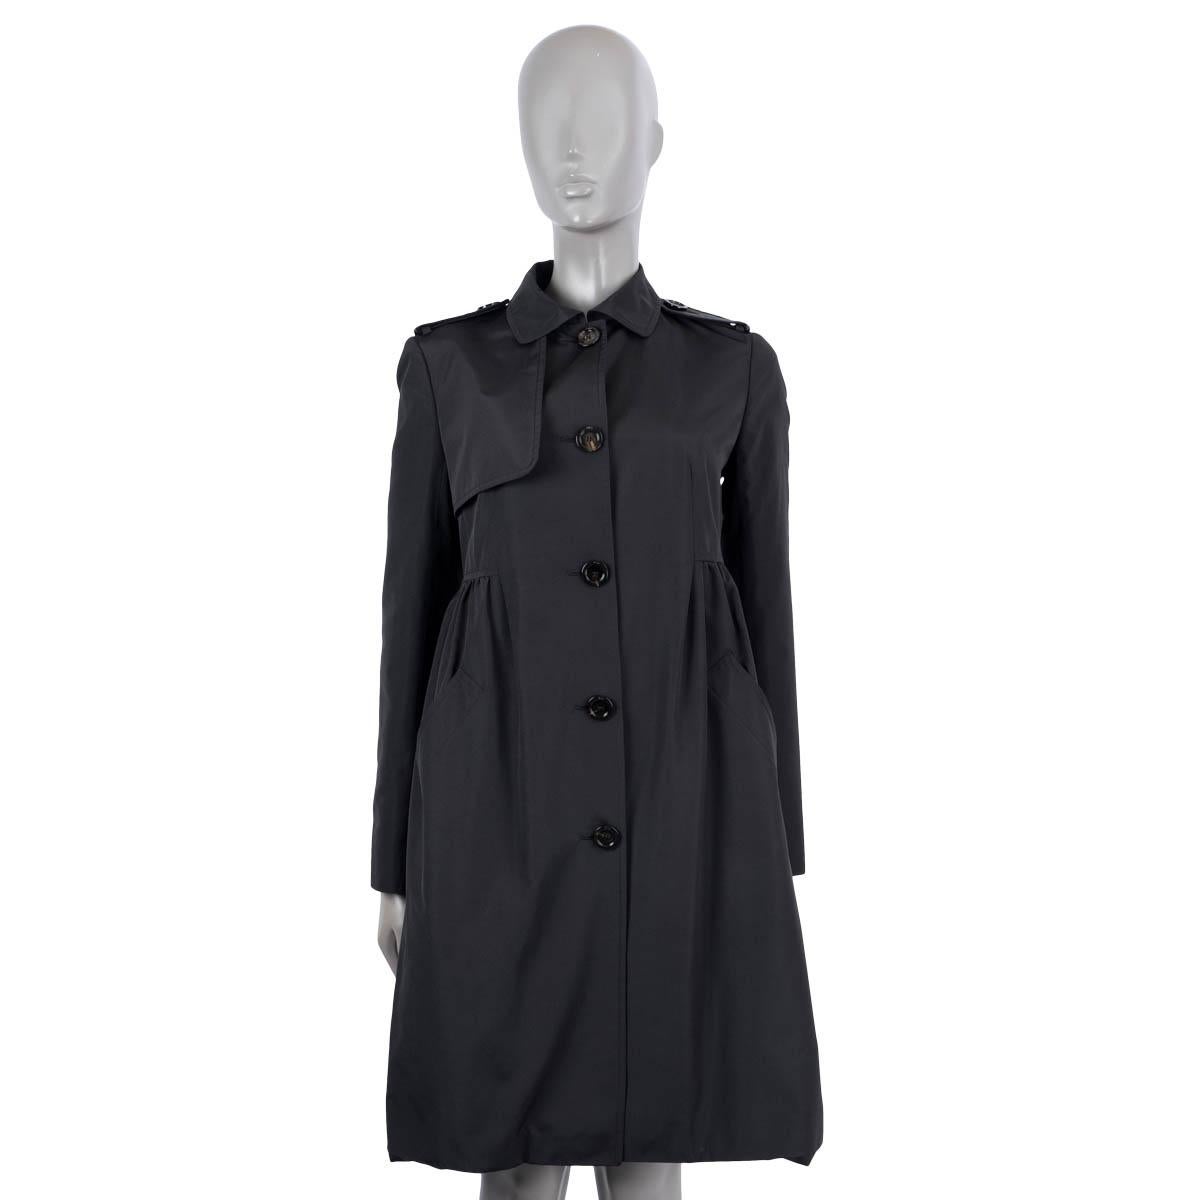 100% authentic Christian Dior buttoned trench coat in black silk (100%). The design features epaulettes on the shoulders, a gathered front, two side slit pockets and a round collar. Lined in black silk (100%). Has been worn and is in excellent